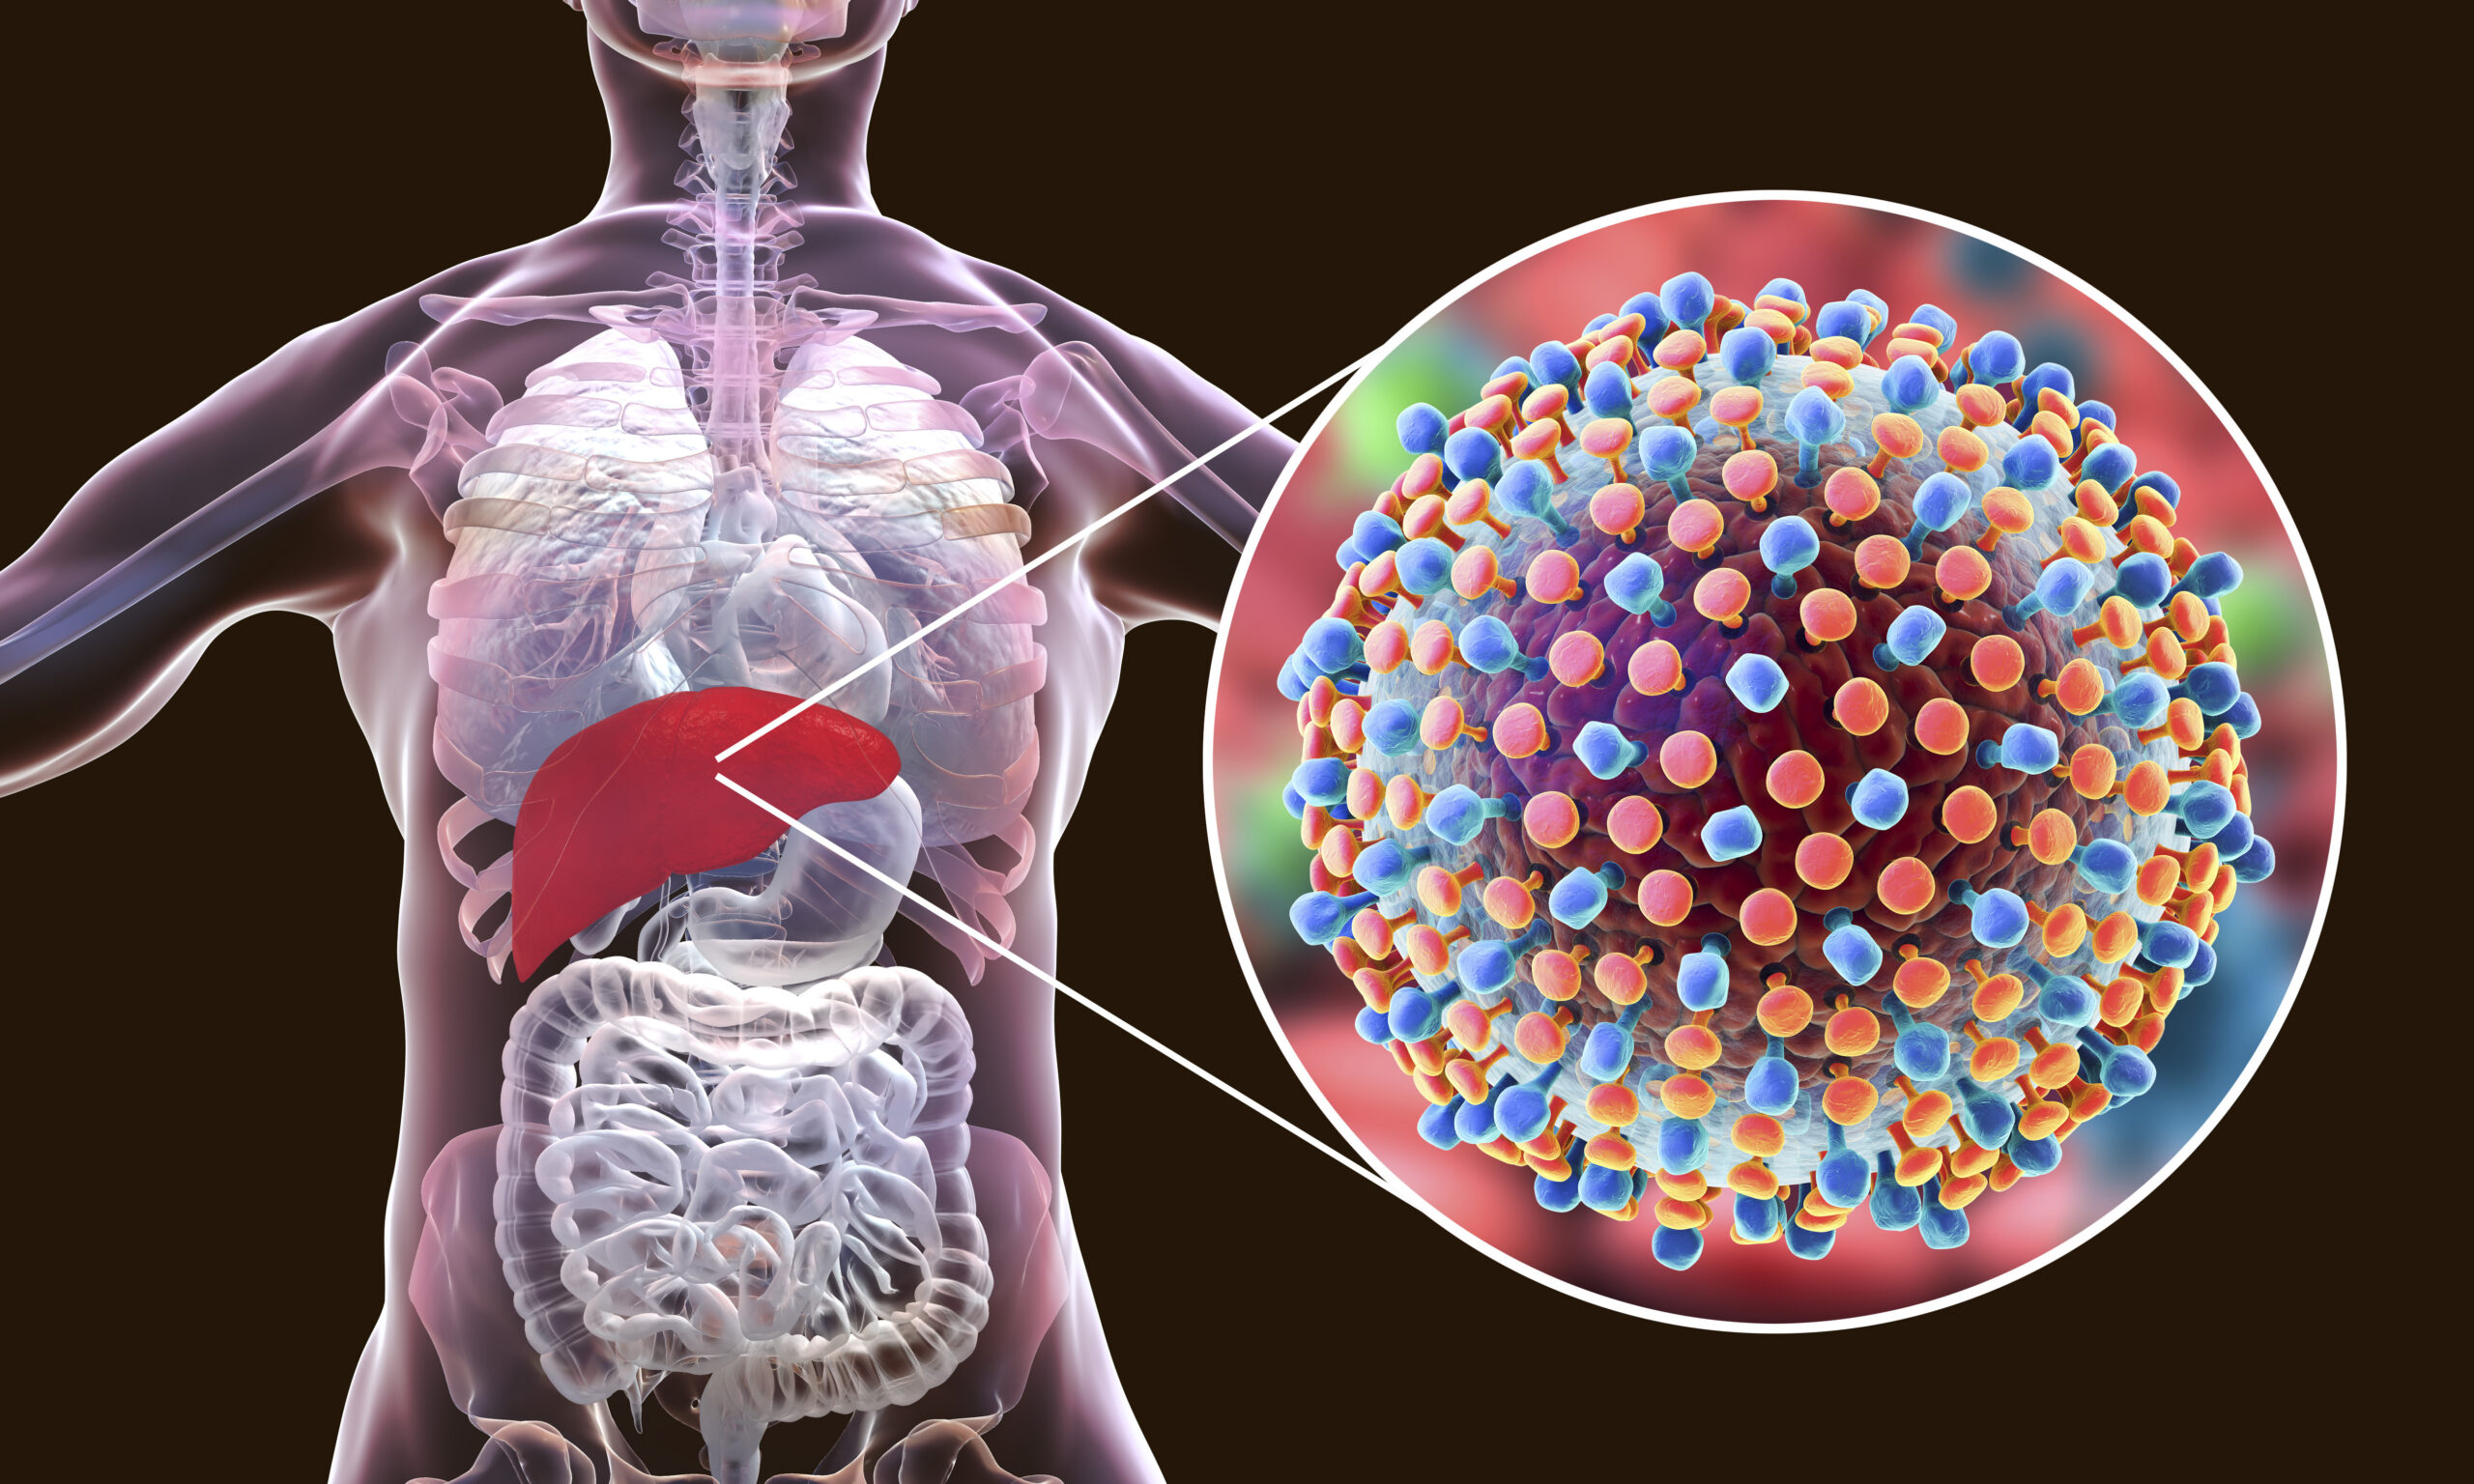 What You Should Know about Hepatitis C